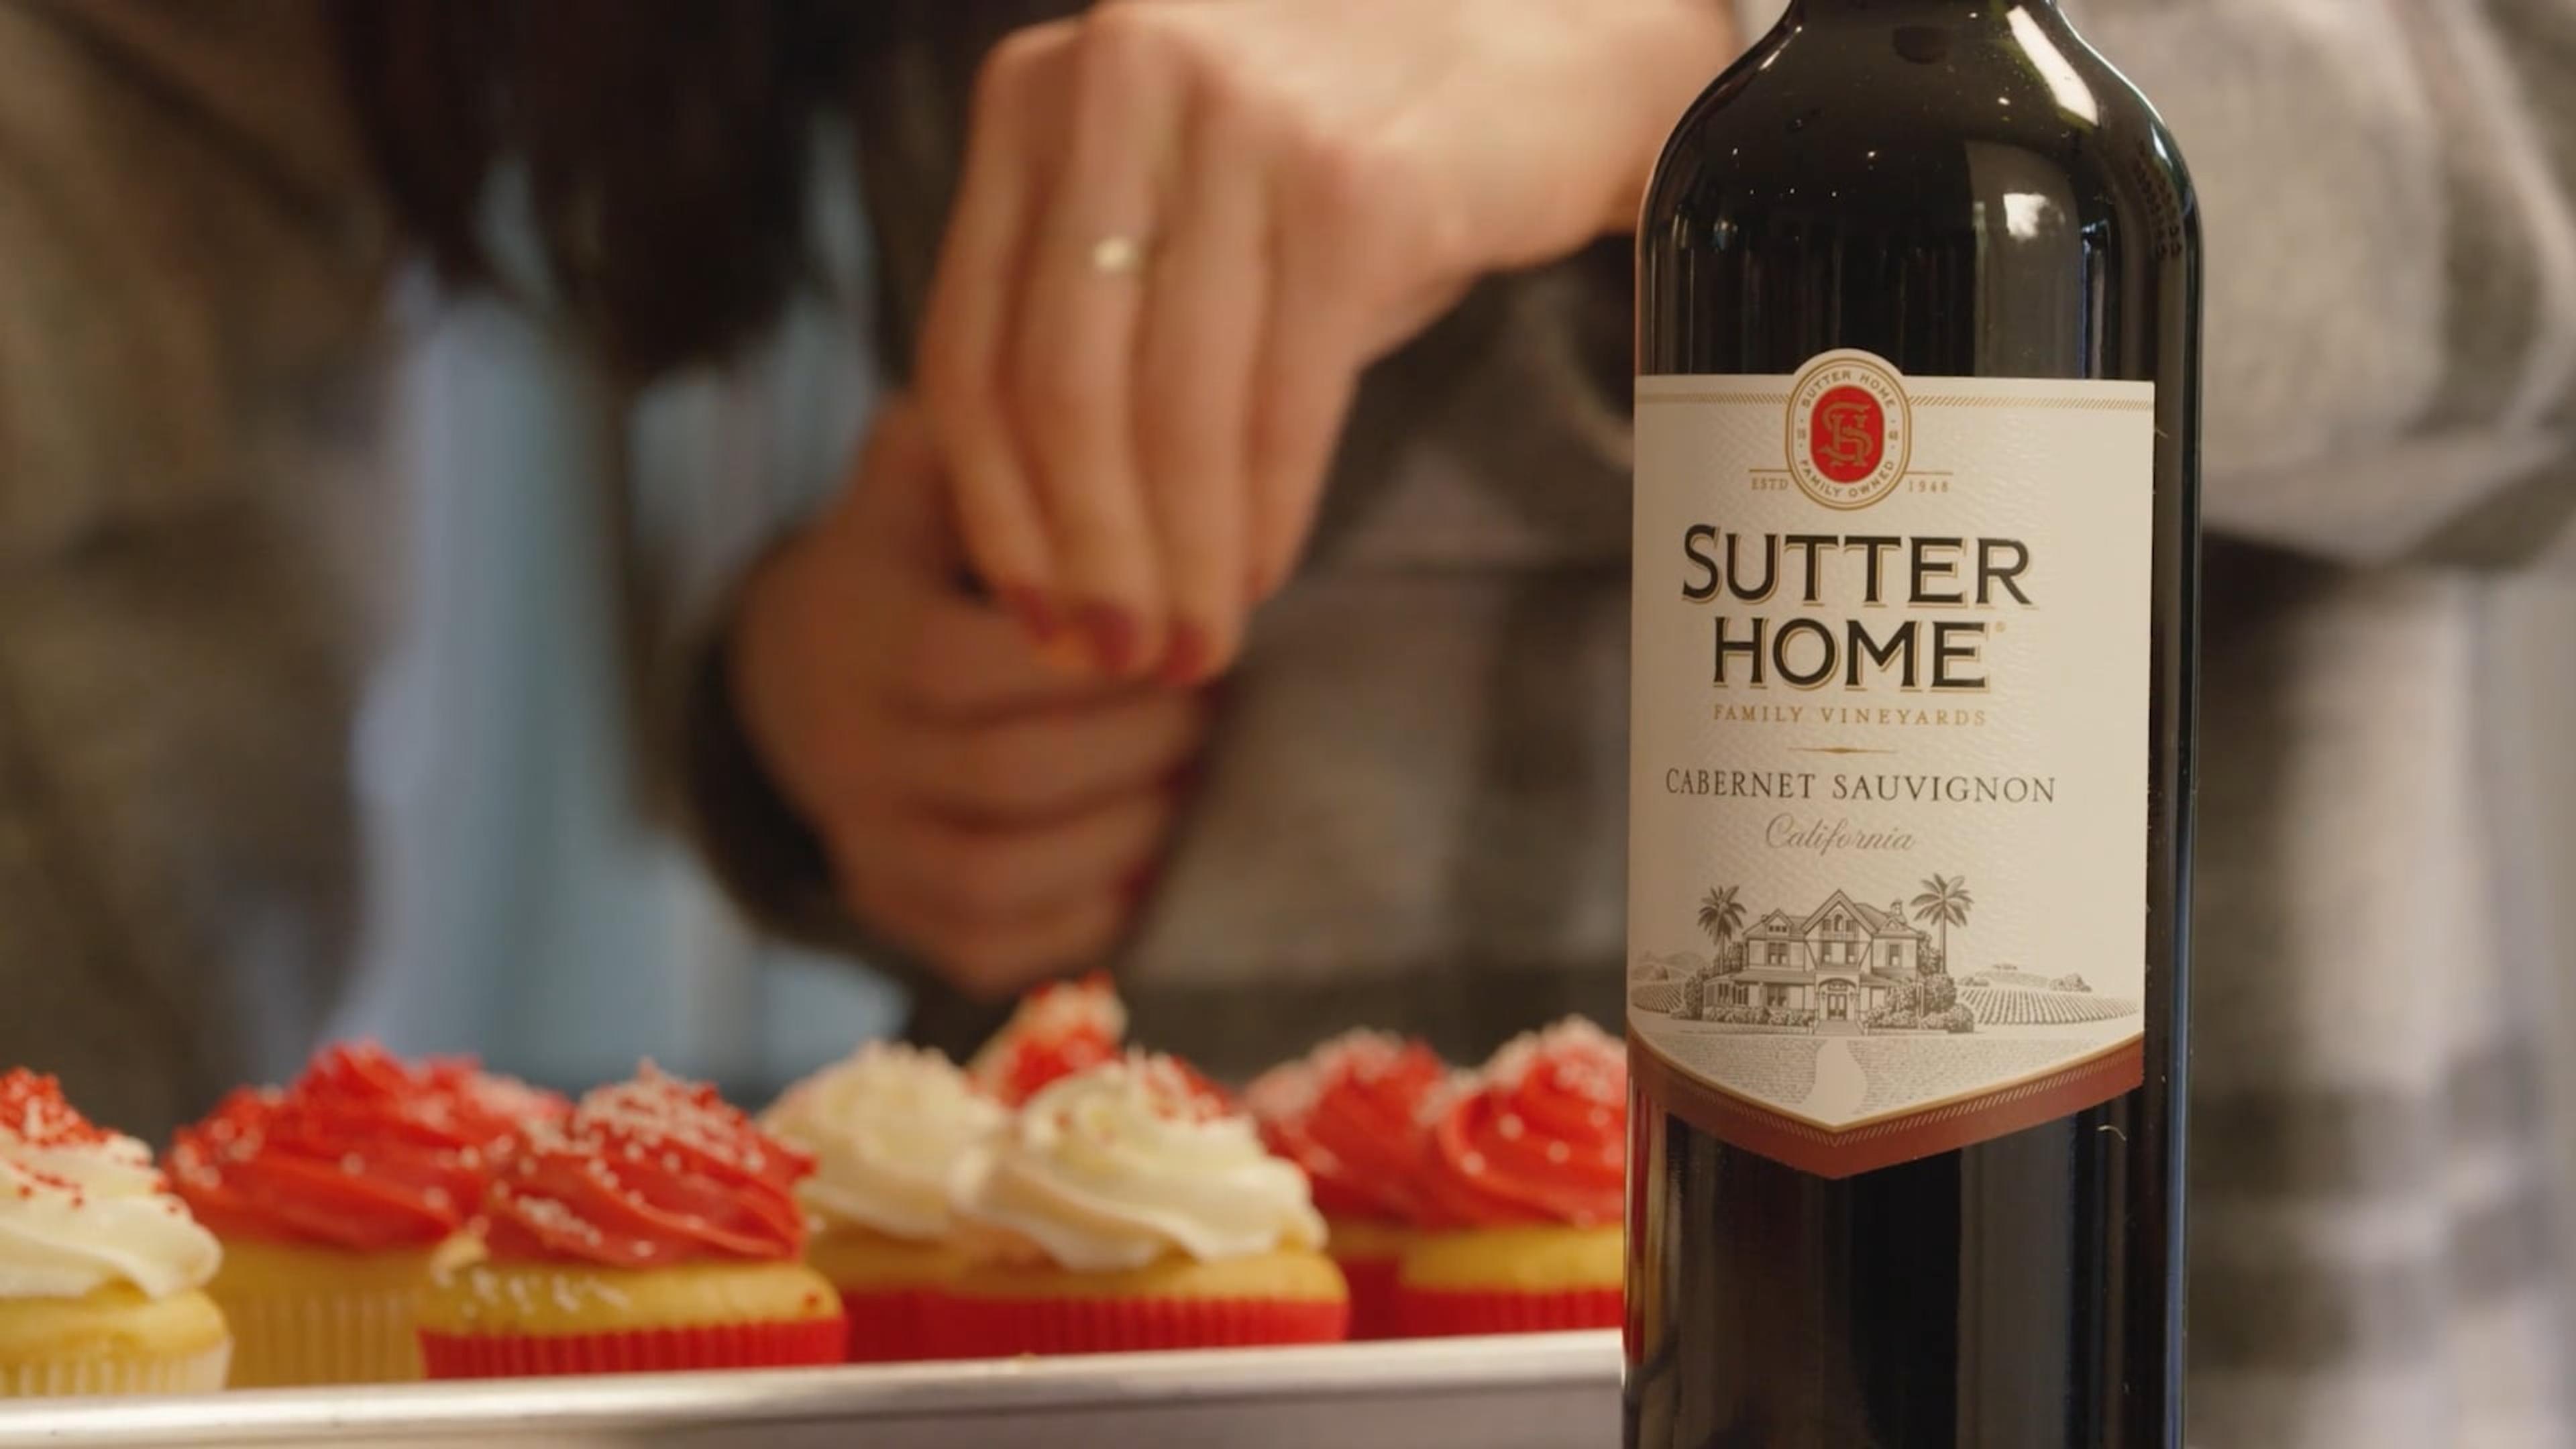 Sutter Home - Holidays (Commercial)